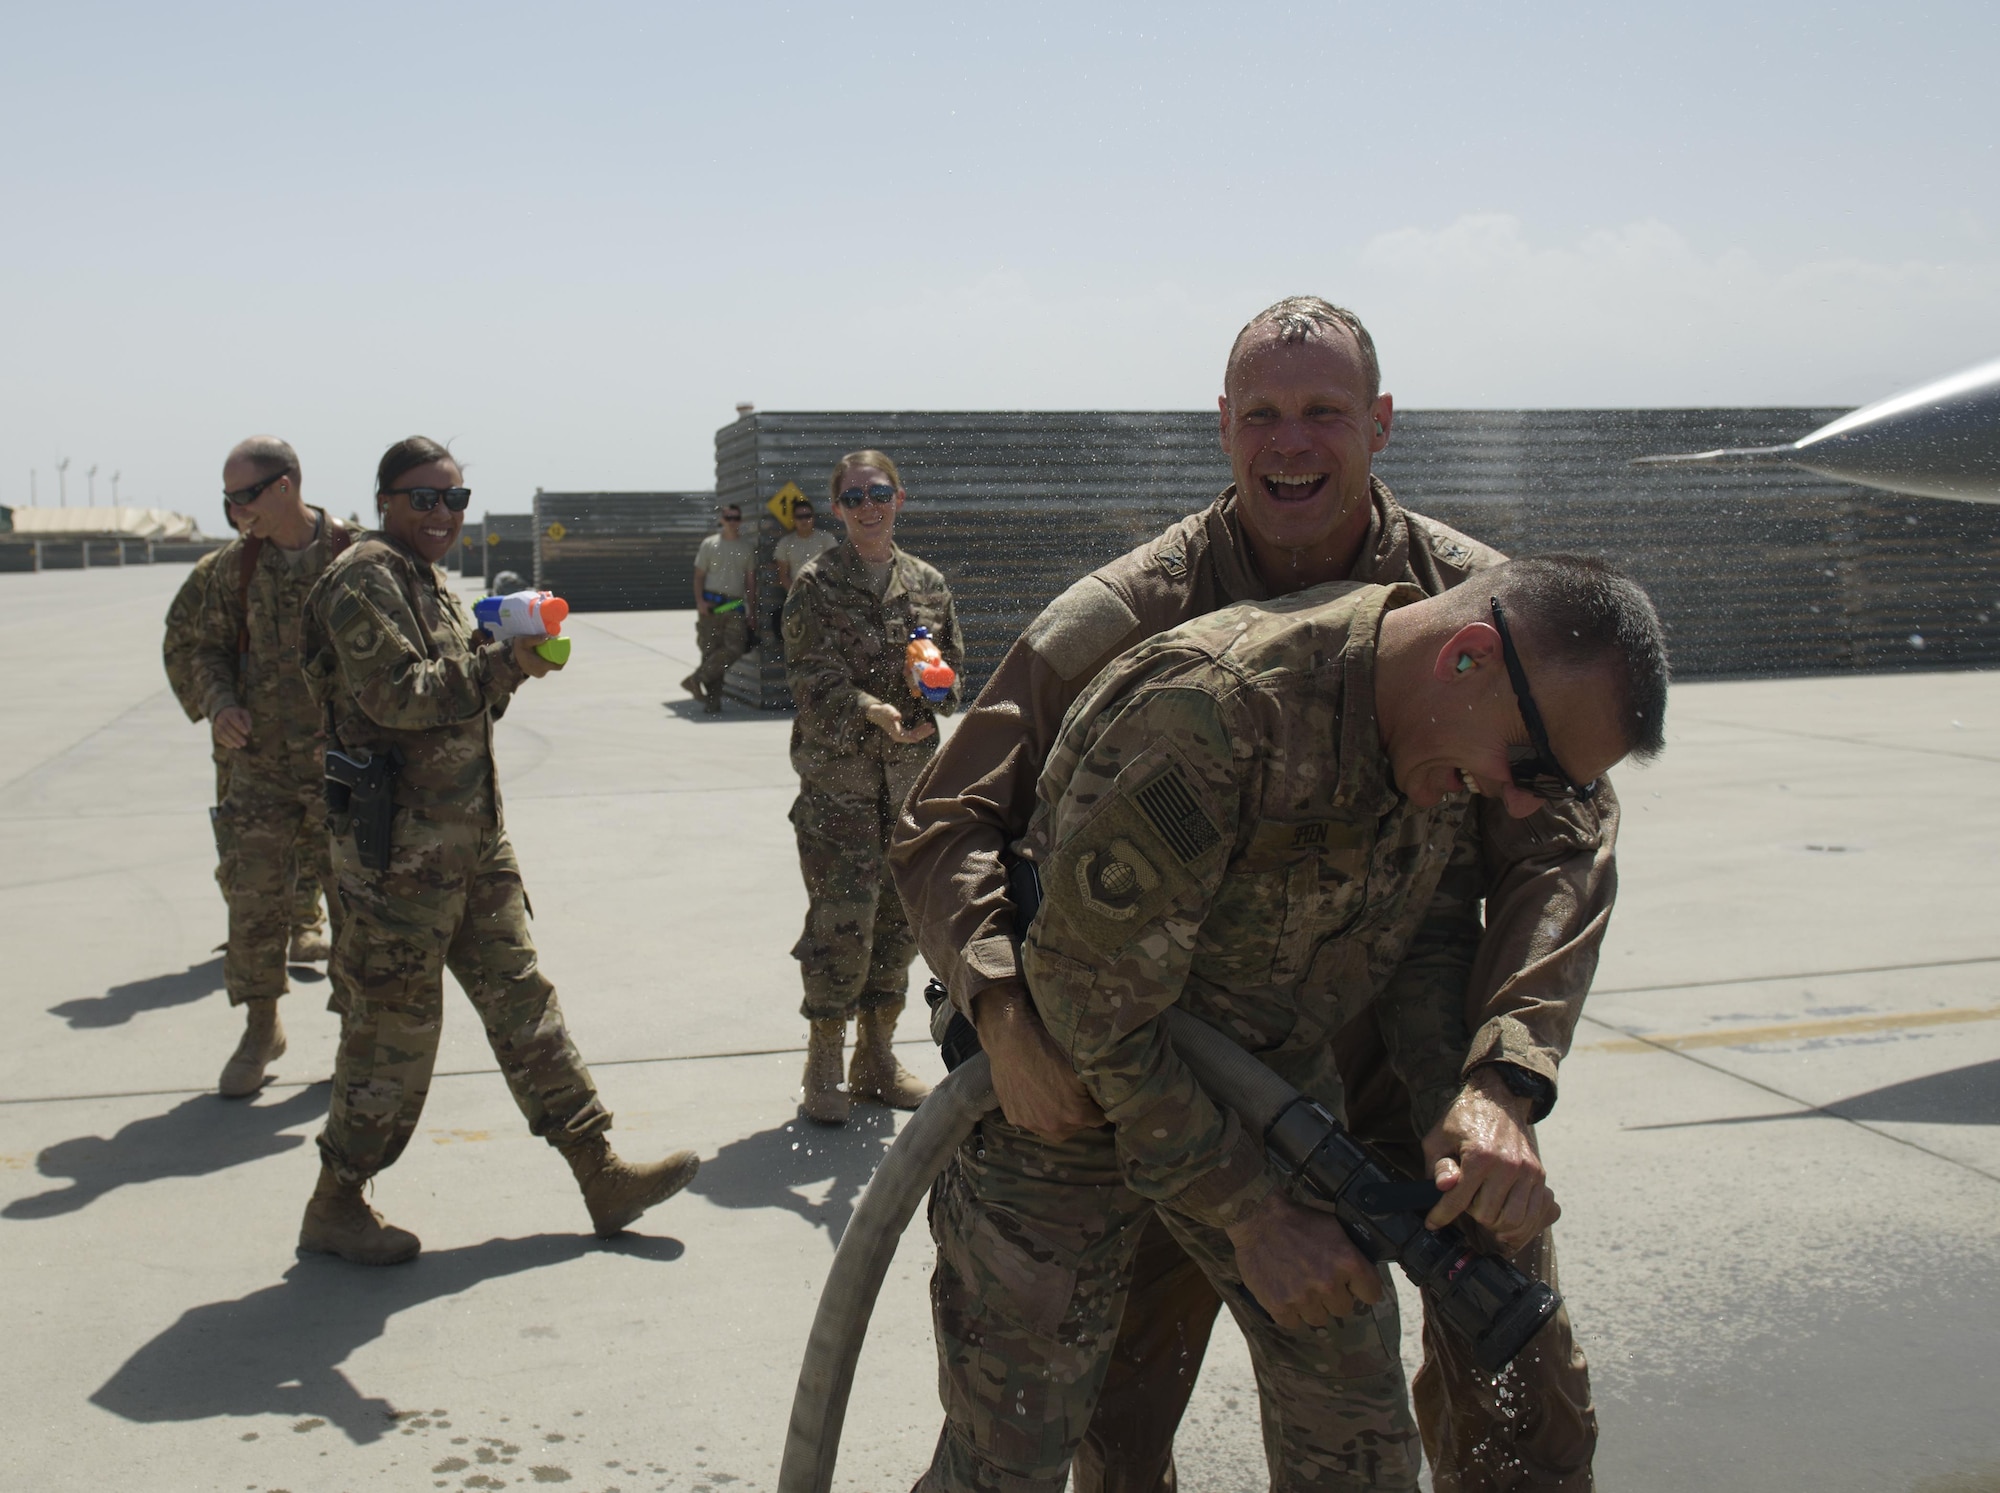 Brig. Gen. Jim Sears, commander of the 455th Air Expeditionary Wing, wrestles a fire hose away from Chief Master Sgt. Peter Speen, command chief of the 455th AEW, after completing his fini flight at Bagram Airfield, Afghanistan, May 22, 2017. Sears, who commanded the 455th AEW for the last 12 months, is a command pilot with more than 3,200 flying hours, including combat missions over Iraq and Afghanistan. (U.S. Air Force photo by Staff Sgt. Benjamin Gonsier)